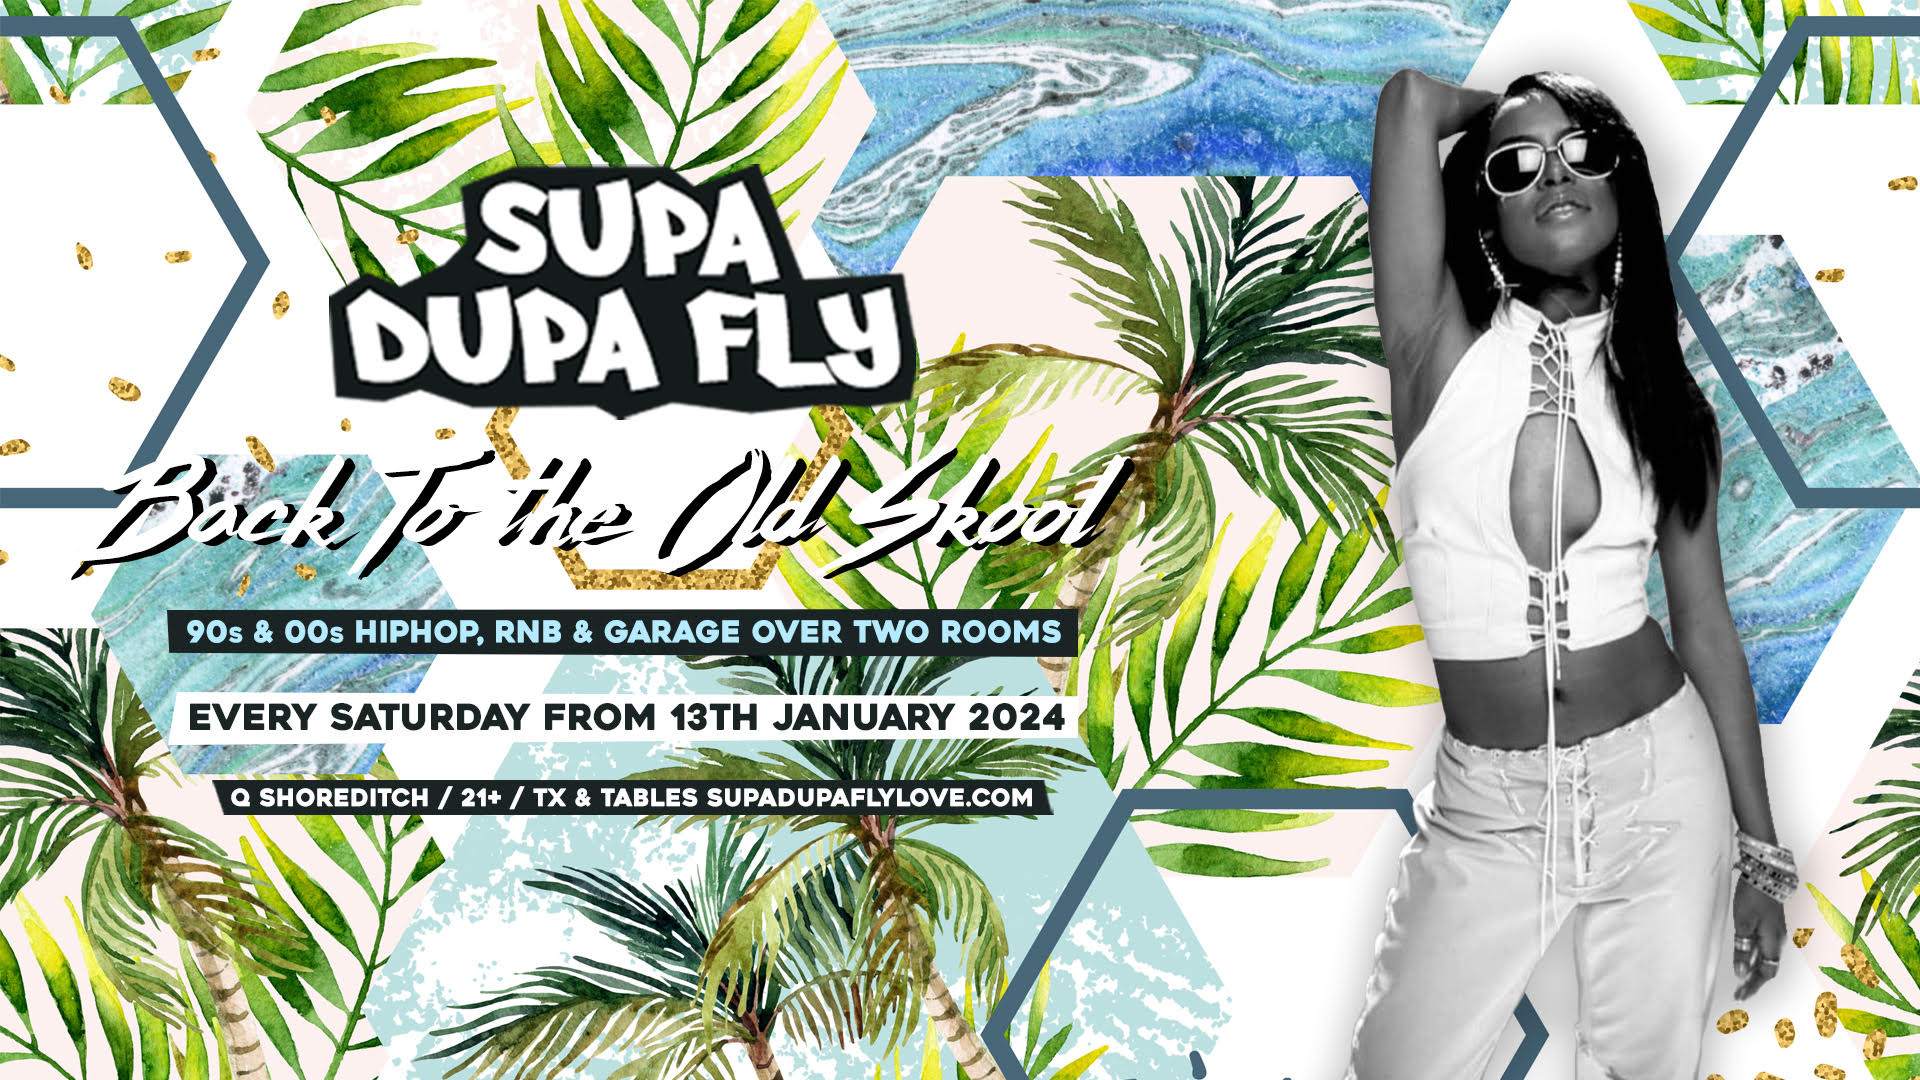 Supa Dupa Fly x Back To The Old Skool Shoreditch - Every Saturday - フライヤー表